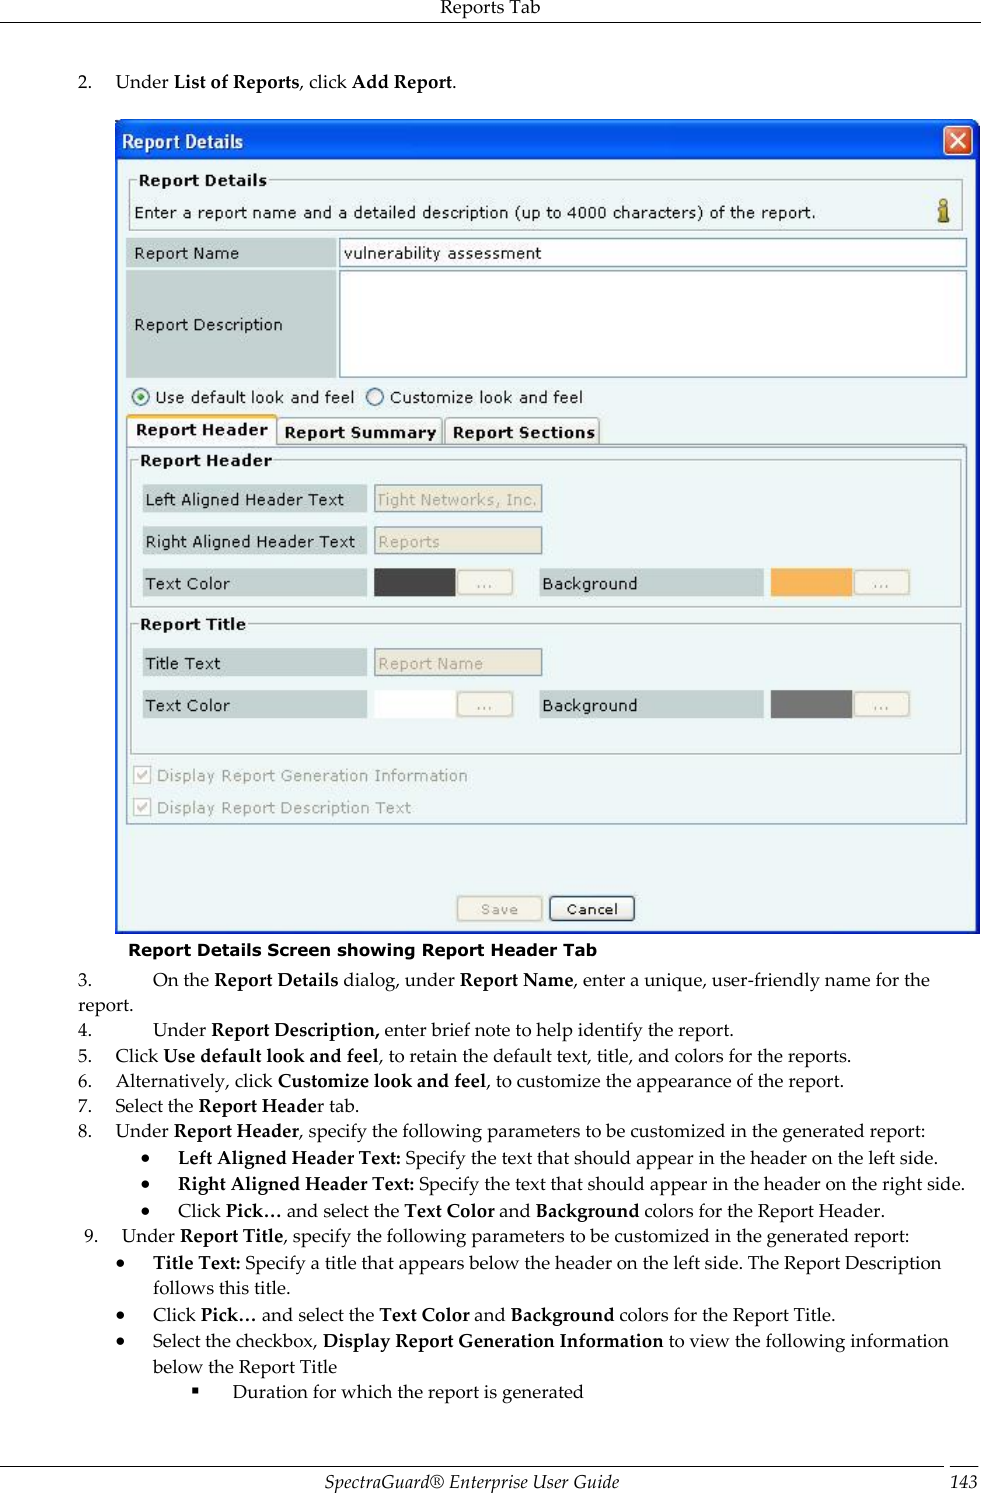 Reports Tab SpectraGuard®  Enterprise User Guide 143 2. Under List of Reports, click Add Report.   Report Details Screen showing Report Header Tab 3. On the Report Details dialog, under Report Name, enter a unique, user-friendly name for the report. 4. Under Report Description, enter brief note to help identify the report. 5. Click Use default look and feel, to retain the default text, title, and colors for the reports. 6. Alternatively, click Customize look and feel, to customize the appearance of the report. 7. Select the Report Header tab. 8. Under Report Header, specify the following parameters to be customized in the generated report:  Left Aligned Header Text: Specify the text that should appear in the header on the left side.  Right Aligned Header Text: Specify the text that should appear in the header on the right side.  Click Pick… and select the Text Color and Background colors for the Report Header. 9. Under Report Title, specify the following parameters to be customized in the generated report:  Title Text: Specify a title that appears below the header on the left side. The Report Description follows this title.  Click Pick… and select the Text Color and Background colors for the Report Title.  Select the checkbox, Display Report Generation Information to view the following information below the Report Title   Duration for which the report is generated 